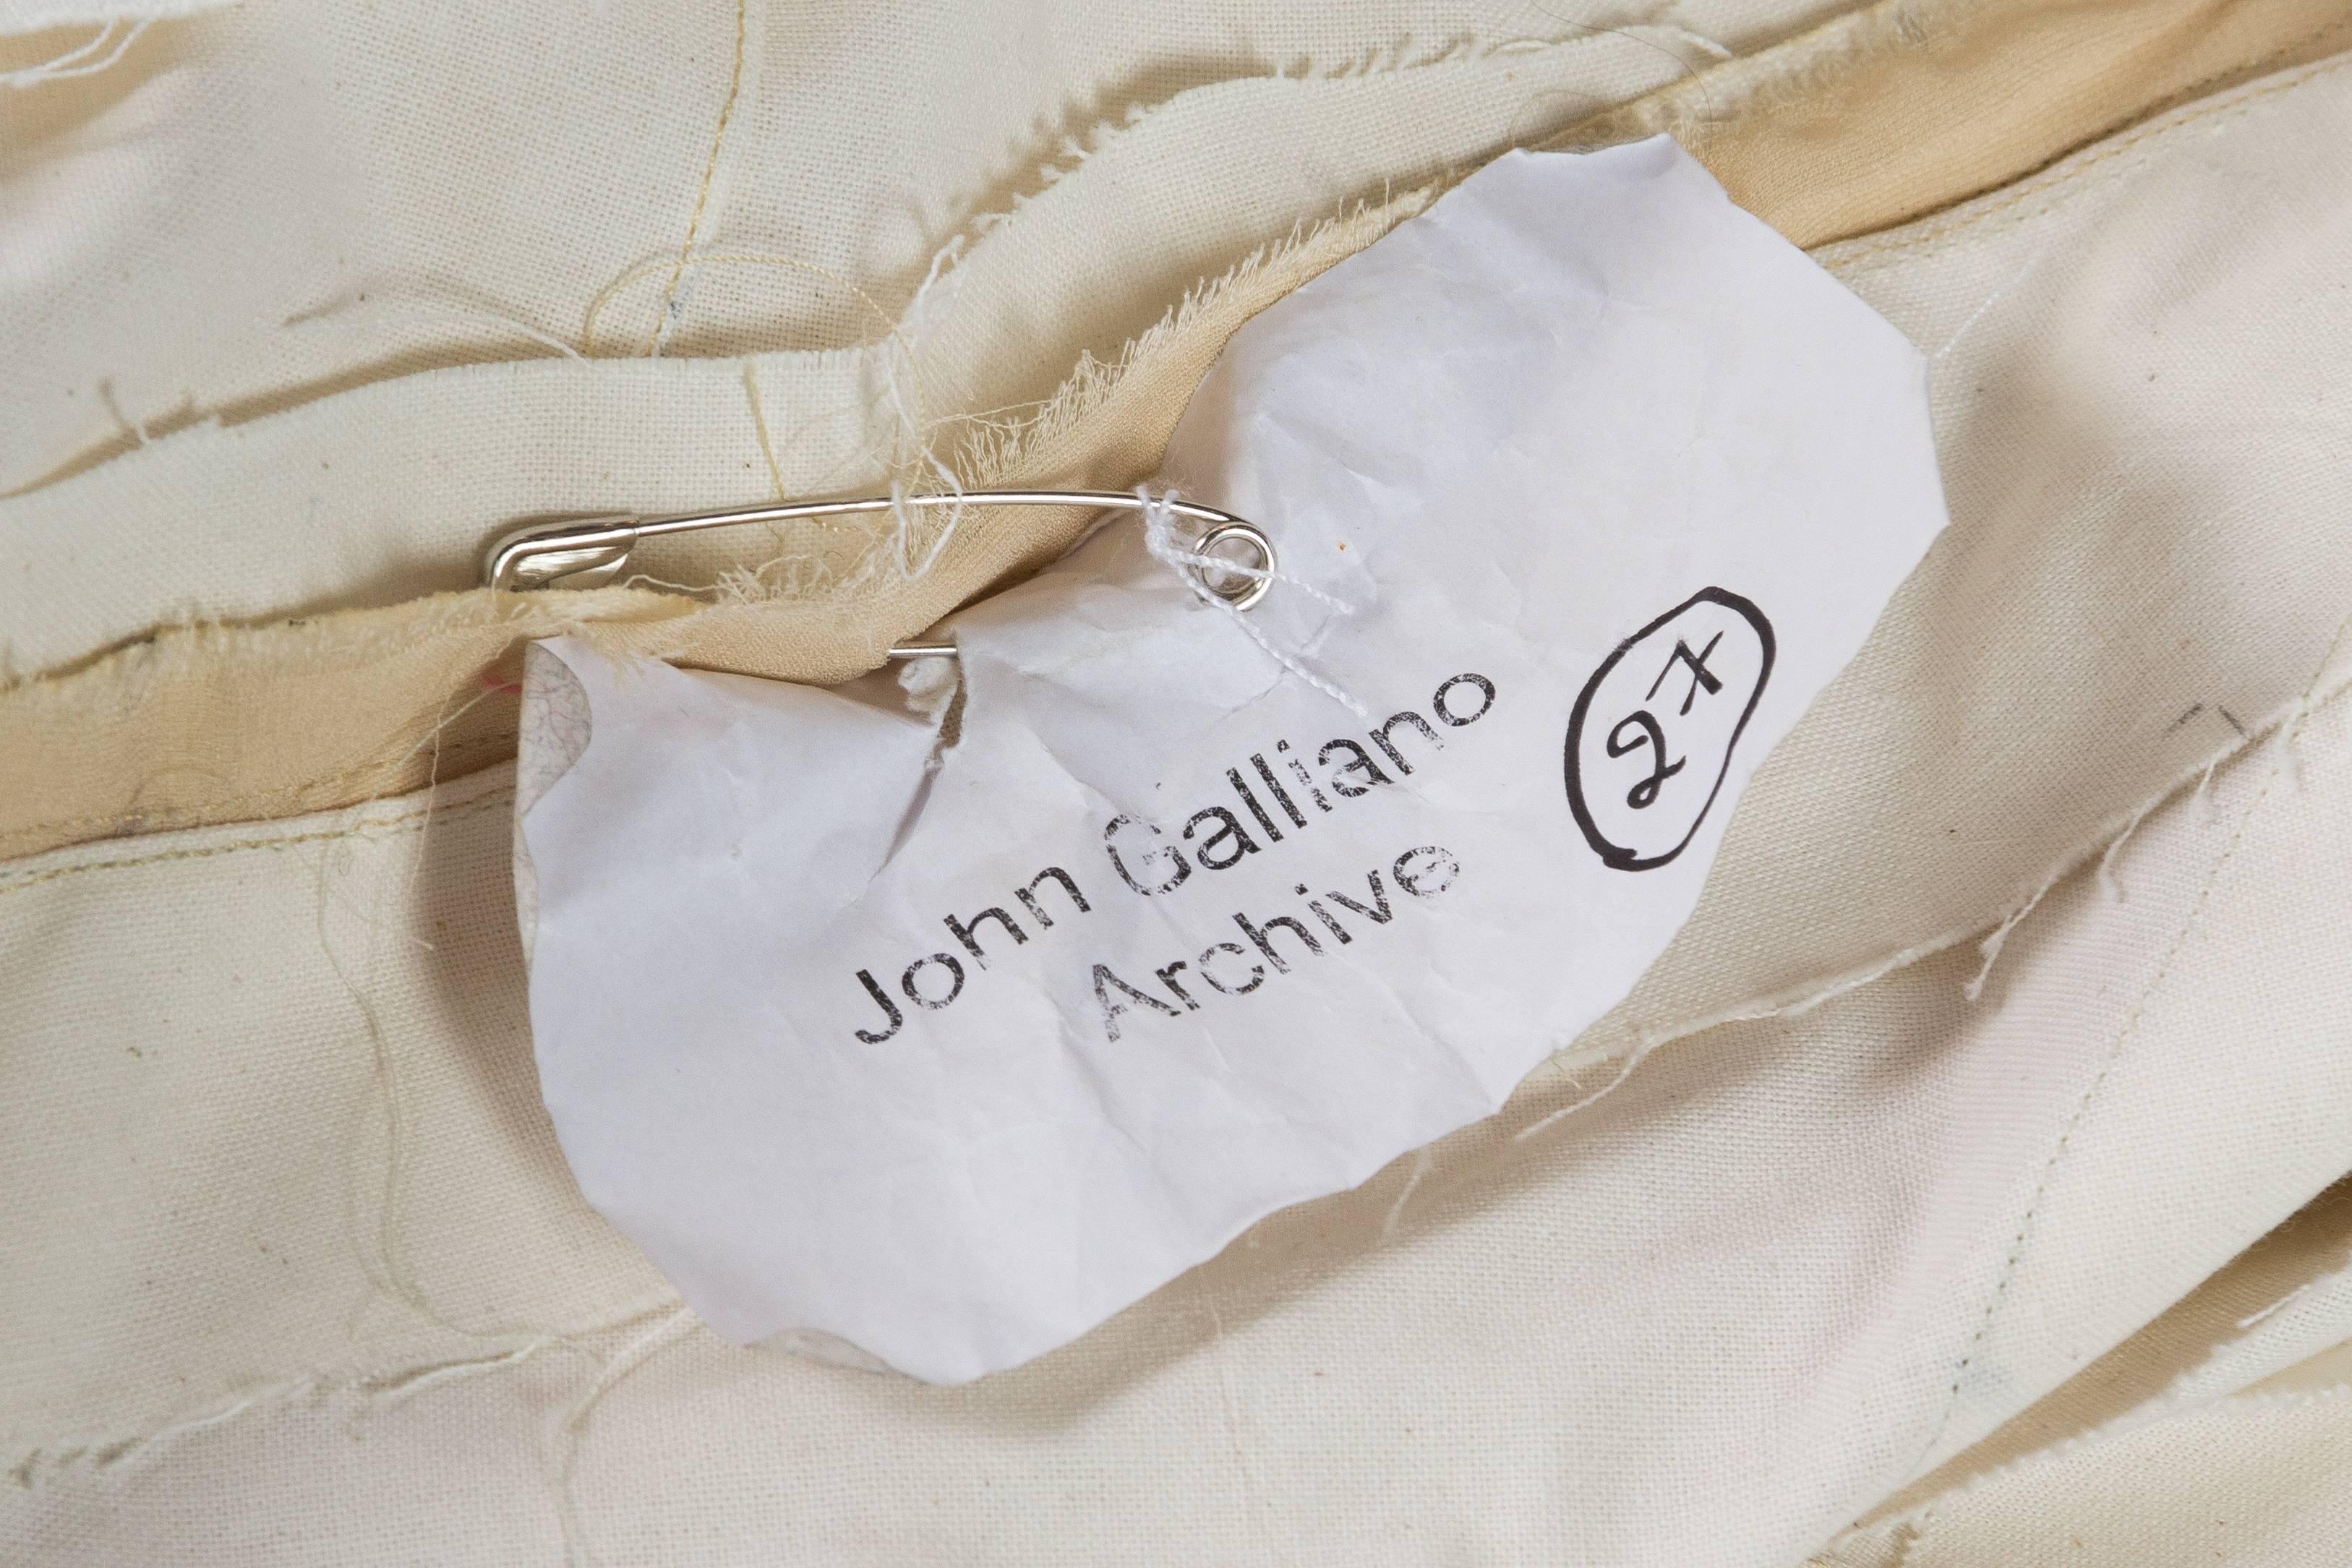 2000S JOHN GALLIANO Working Muslin Sample Skirt From Galliano's Archive For Sale 6